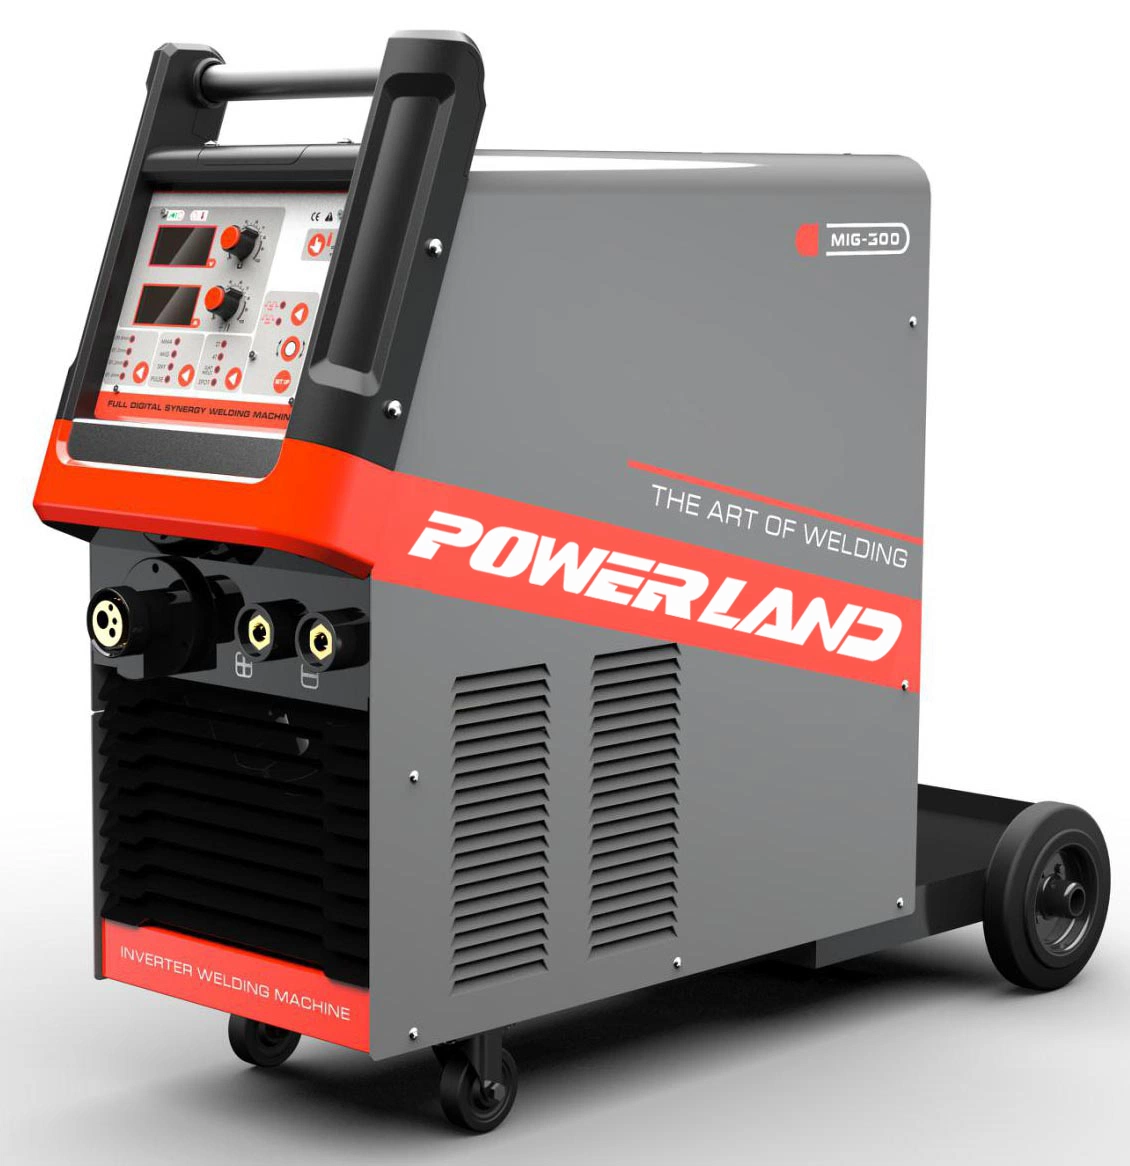 450volt 3phase Aluminum Welding Machine MIG Pulse Spot Weld Multiple Function 3 in 1 Welder Pre-Set Synergy 300A Semi-Automatic Industrial Equipment 15kgs Wire